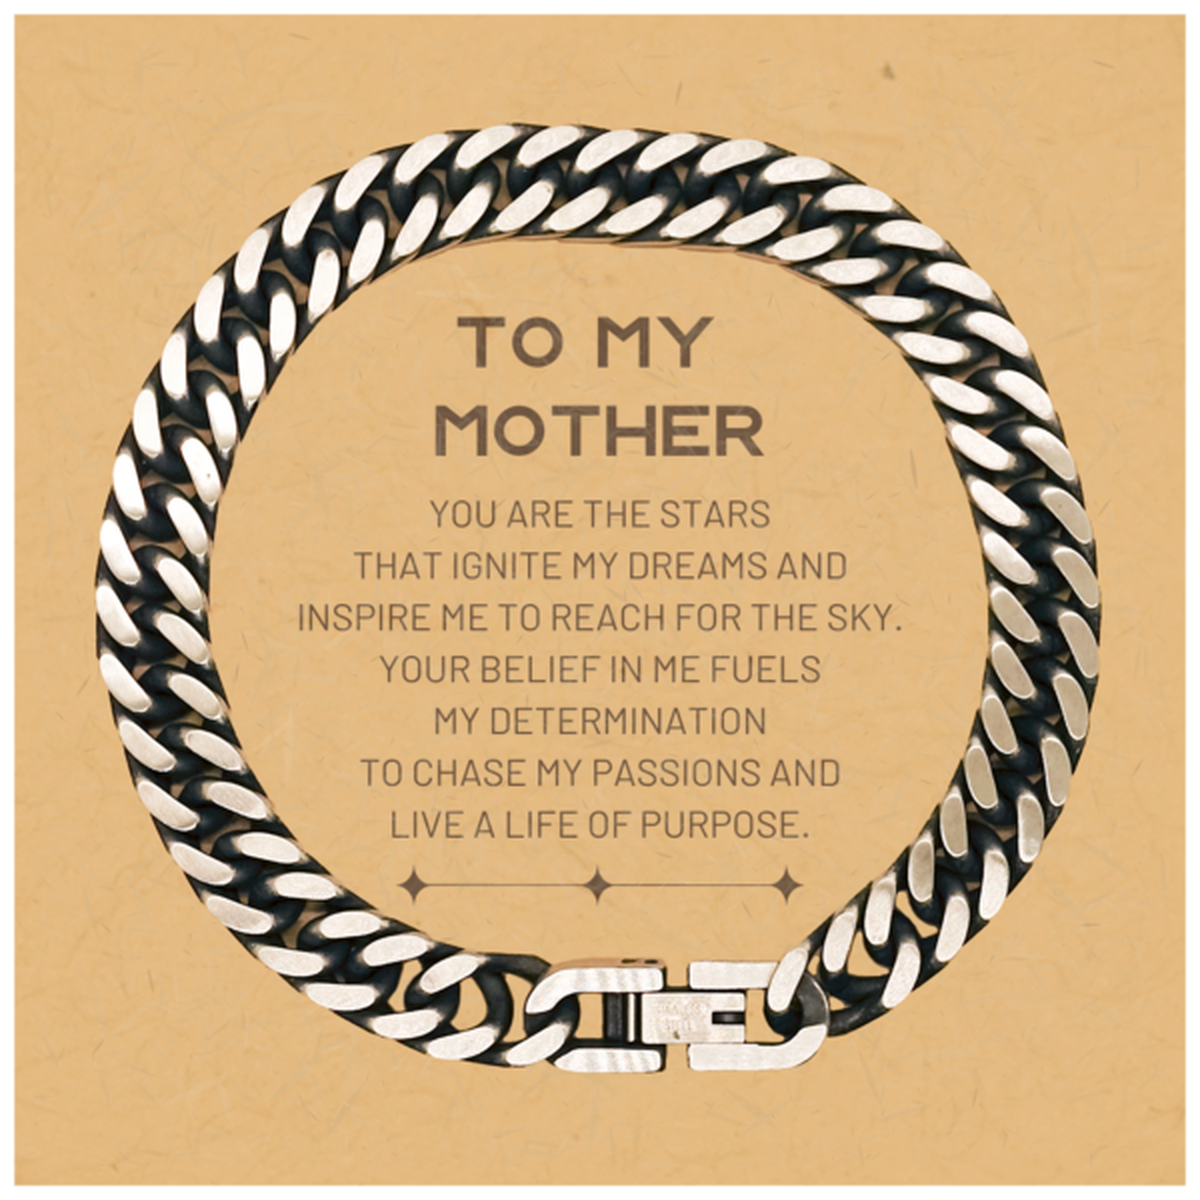 To My Mother Cuban Link Chain Bracelet, You are the stars that ignite my dreams and inspire me to reach for the sky, Birthday Christmas Unique Gifts For Mother, Thank You Gifts For Mother